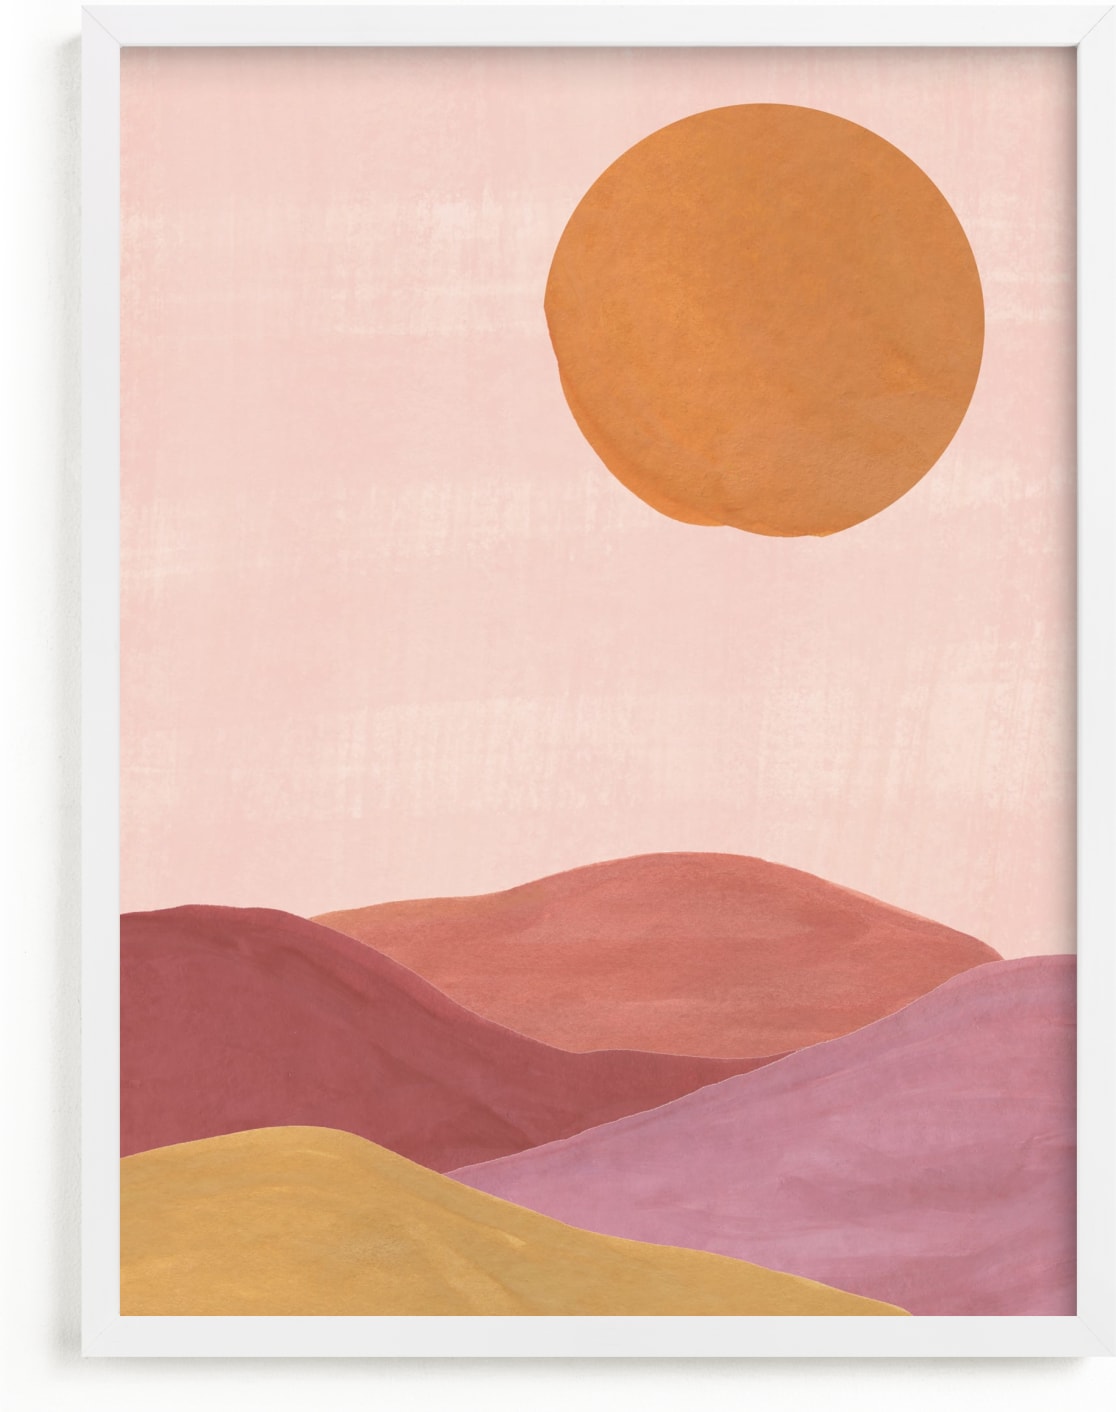 This is a yellow, pink, orange art by Annie Shapiro called Sand mountains.